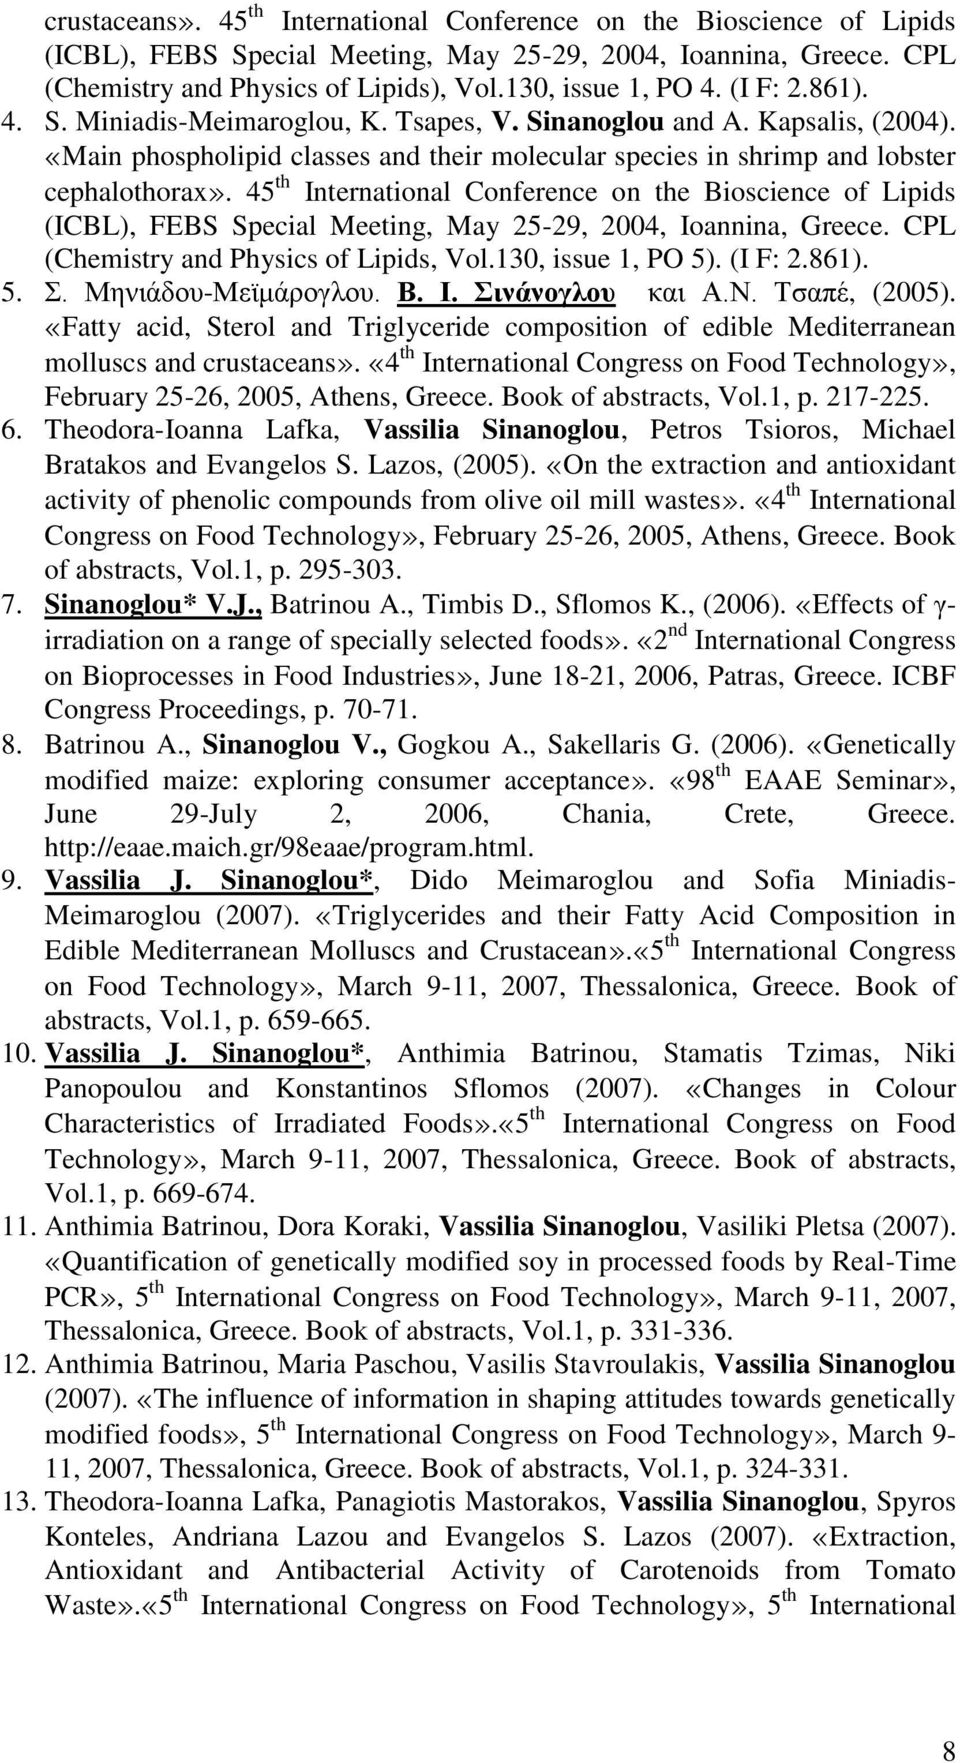 45 th International Conference on the Bioscience of Lipids (ICBL), FEBS Special Meeting, May 25-29, 2004, Ioannina, Greece. CPL (Chemistry and Physics of Lipids, Vol.130, issue 1, PO 5). (I F: 2.861).